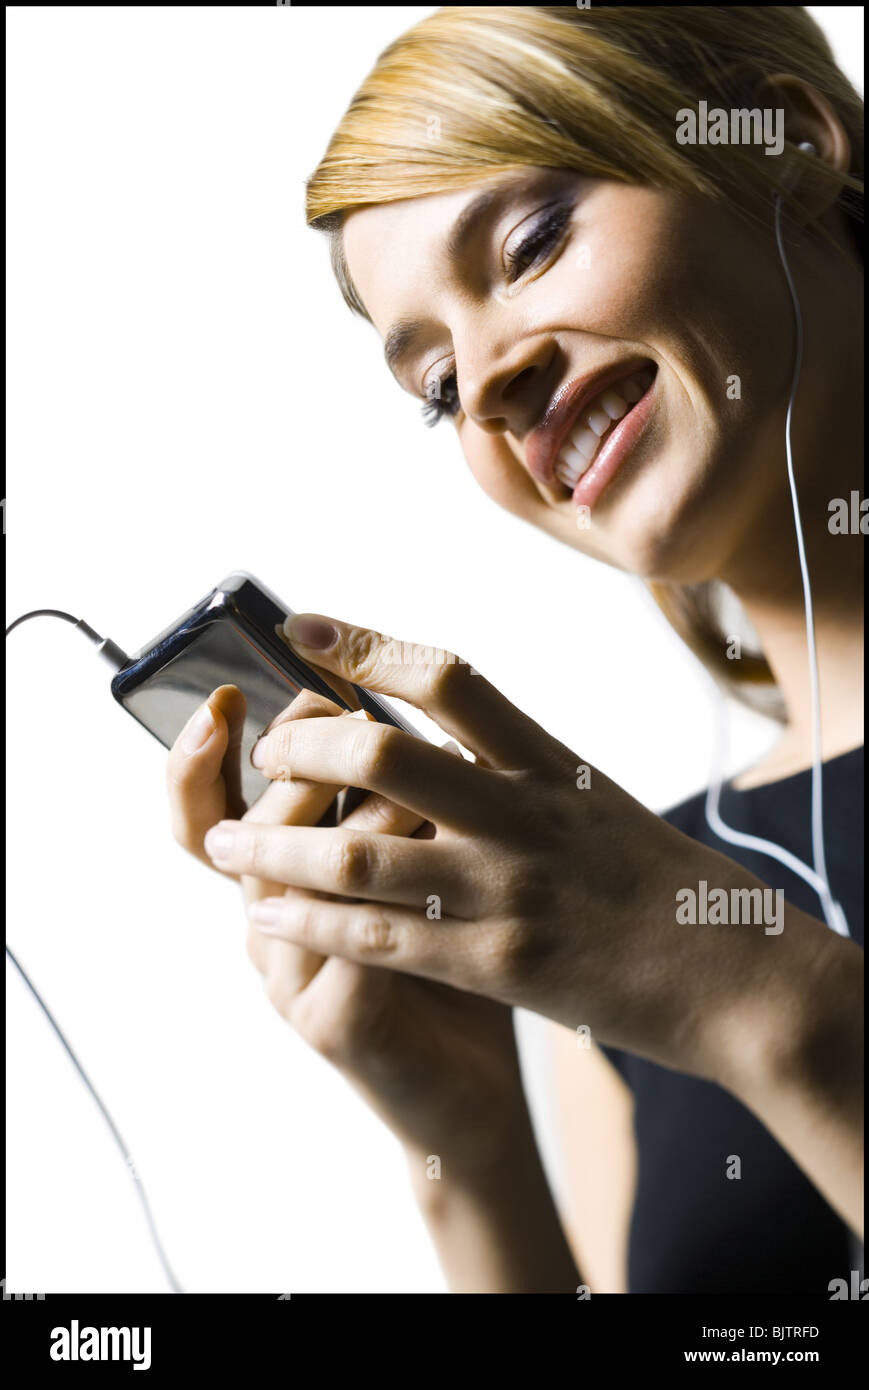 Woman with listening device and earbuds Stock Photo